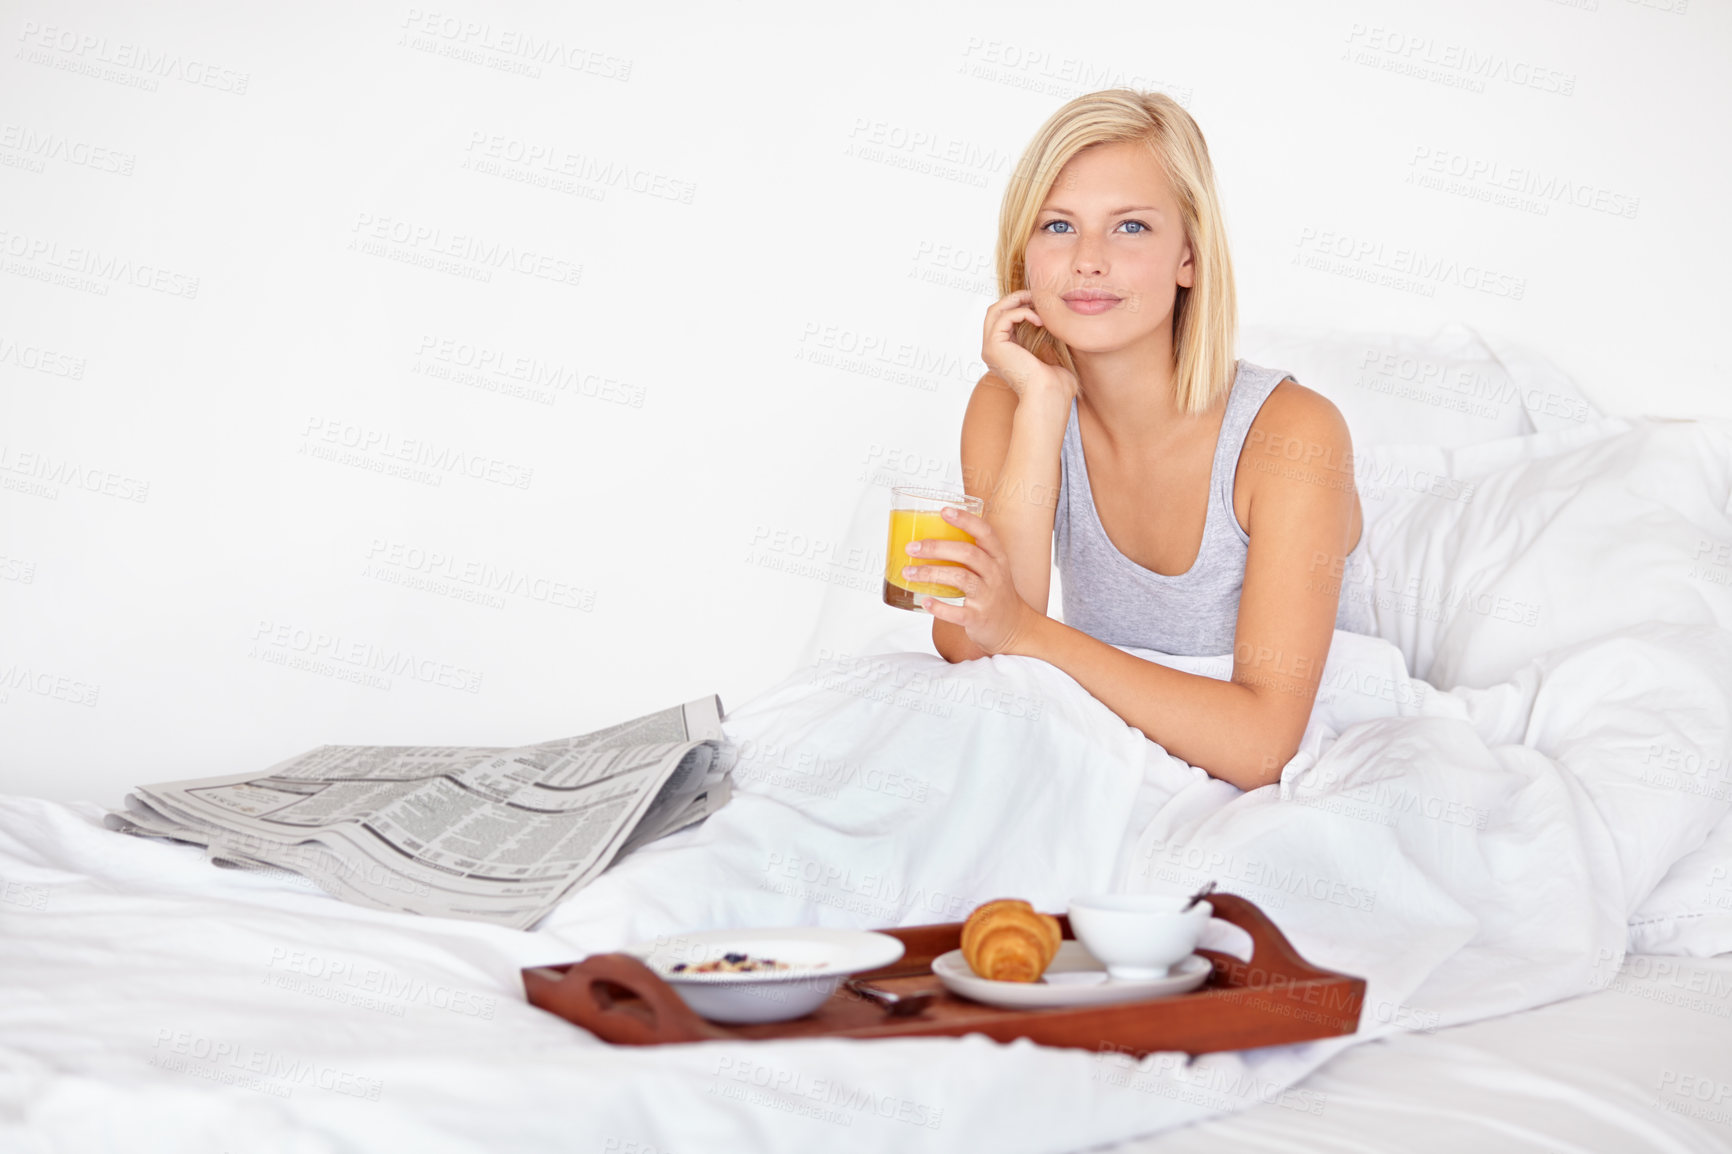 Buy stock photo Healthy, breakfast and portrait of woman in bed with food, orange juice and relax with newspaper. Calm, girl and eating in bedroom on vacation with croissant, brunch and glass with drink in home